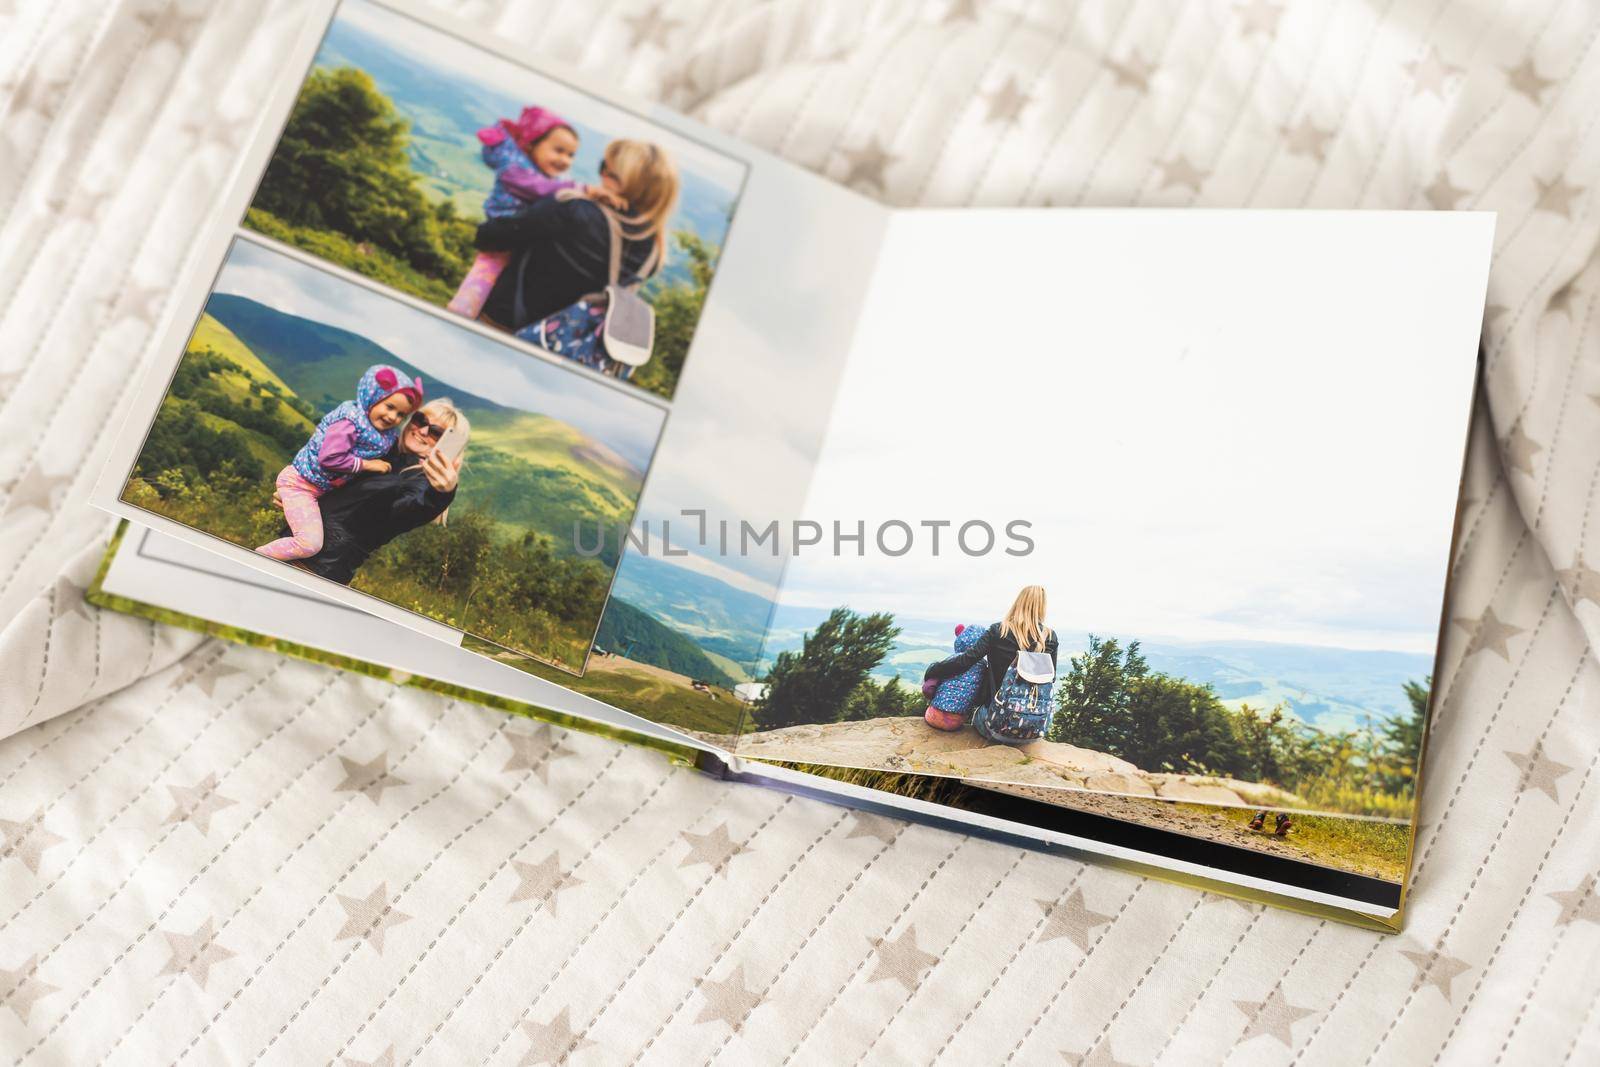 Photo Books or Albums Provide Sweet Memory of Growing Up Process to Family Members. by Andelov13